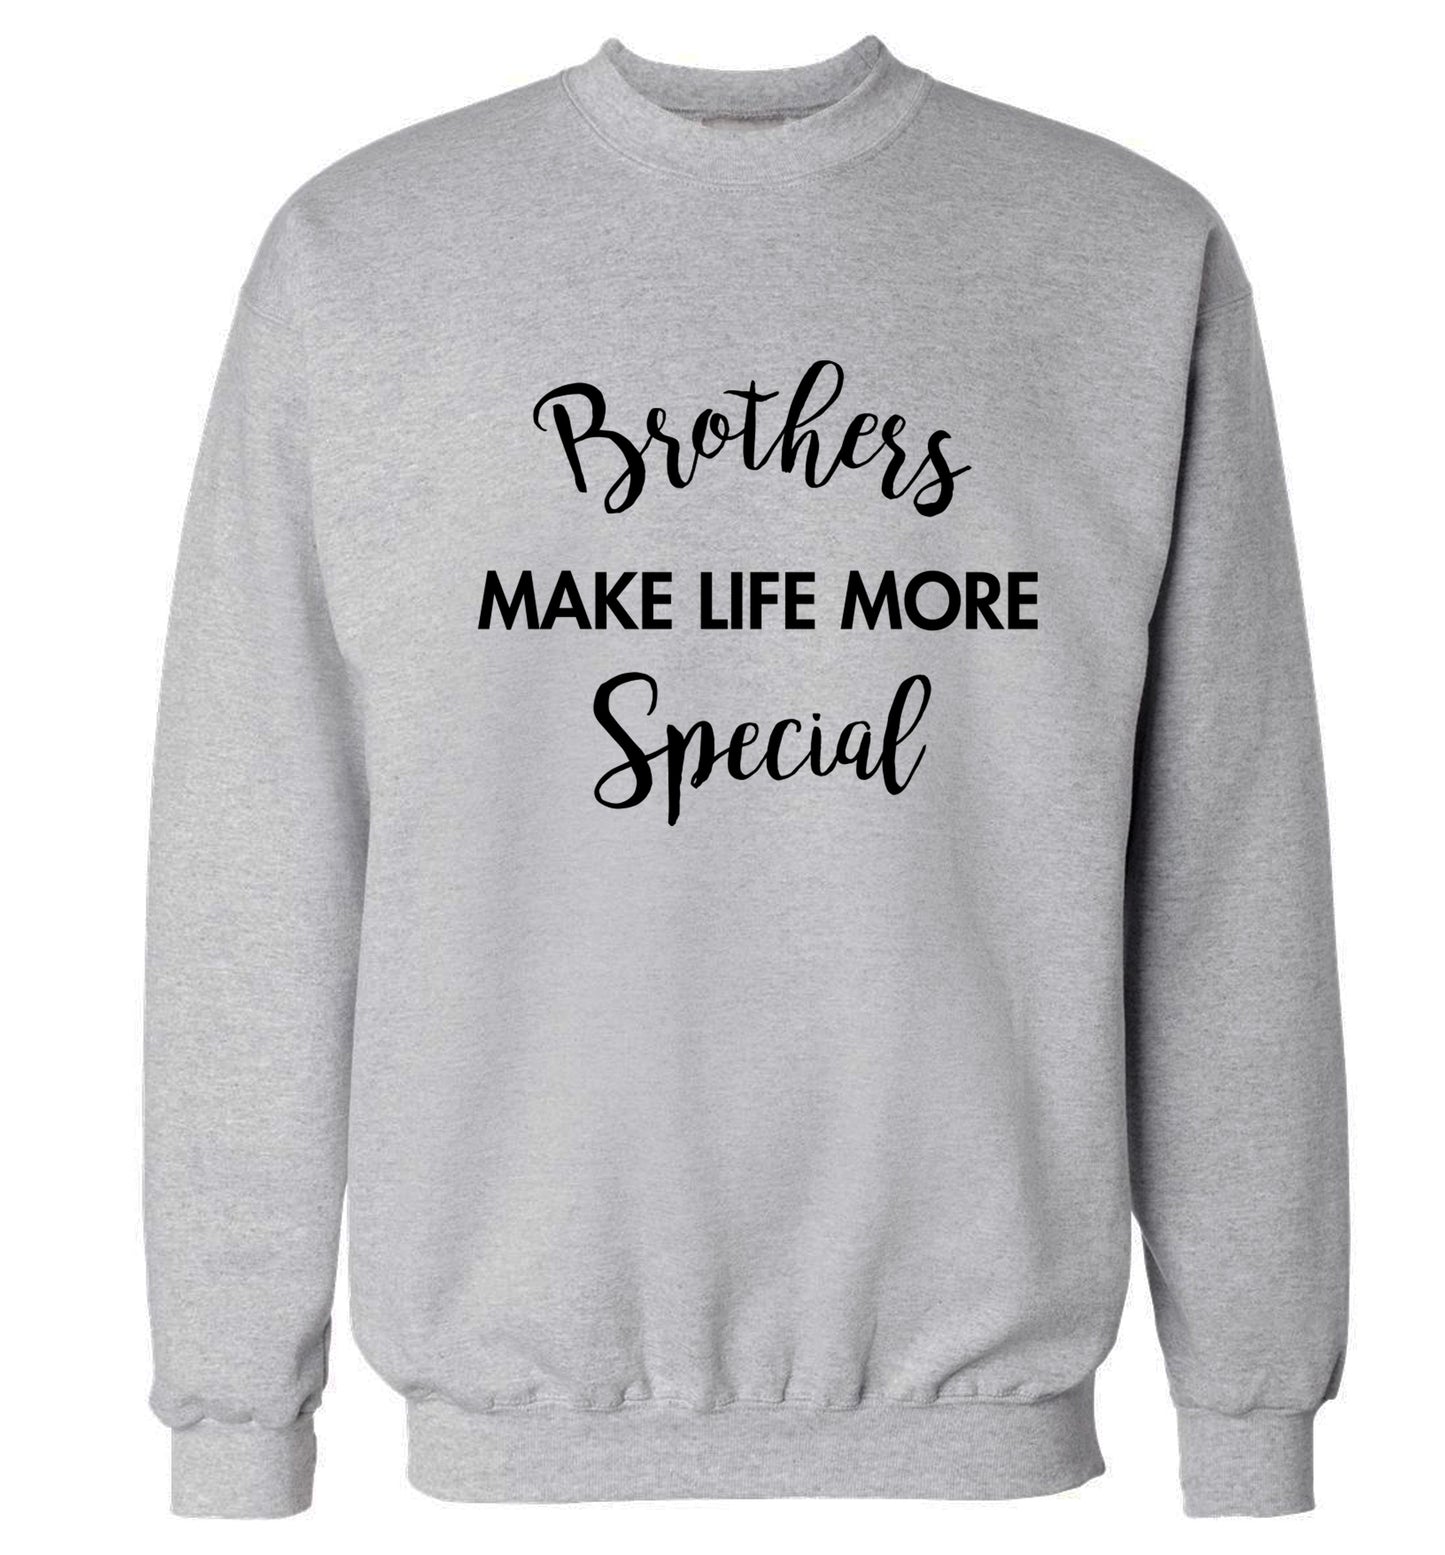 Brothers make life more special Adult's unisex grey Sweater 2XL